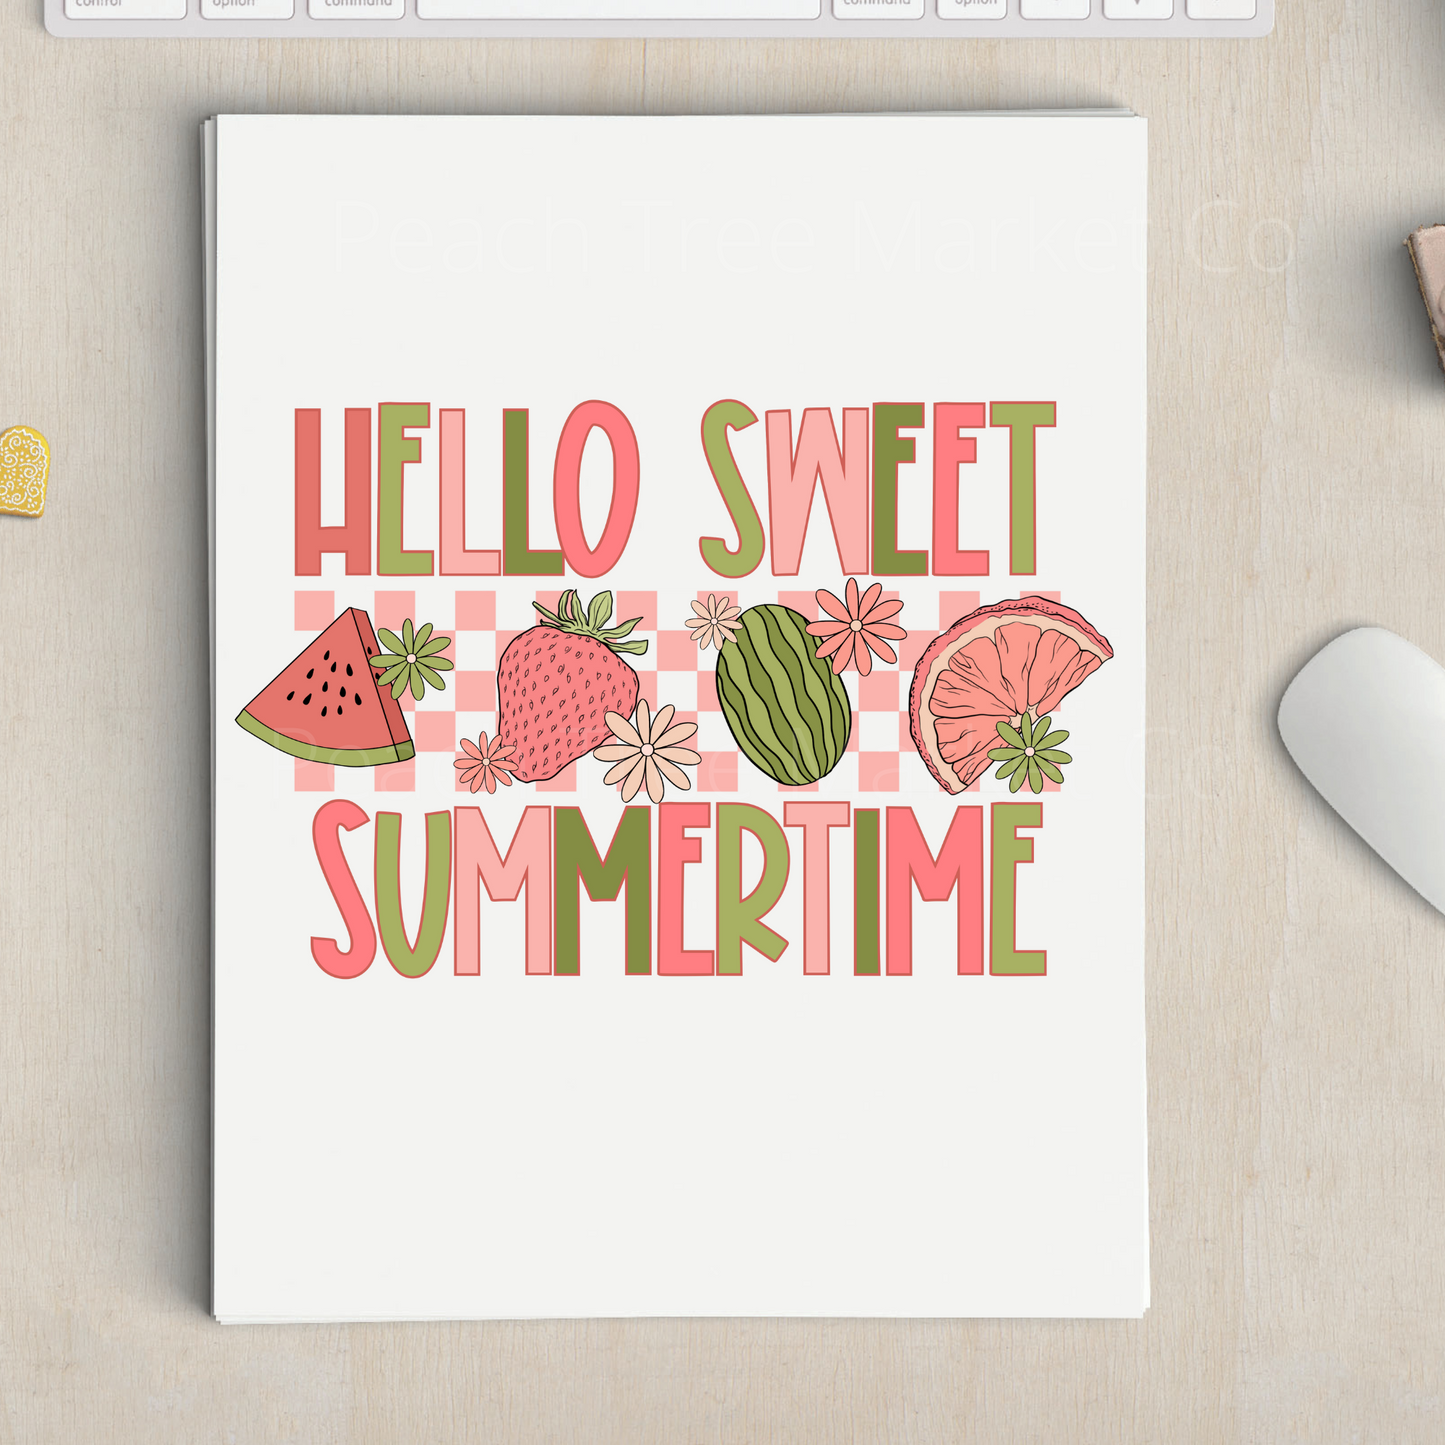 Hello Sweet Summertime Sublimation Transfers